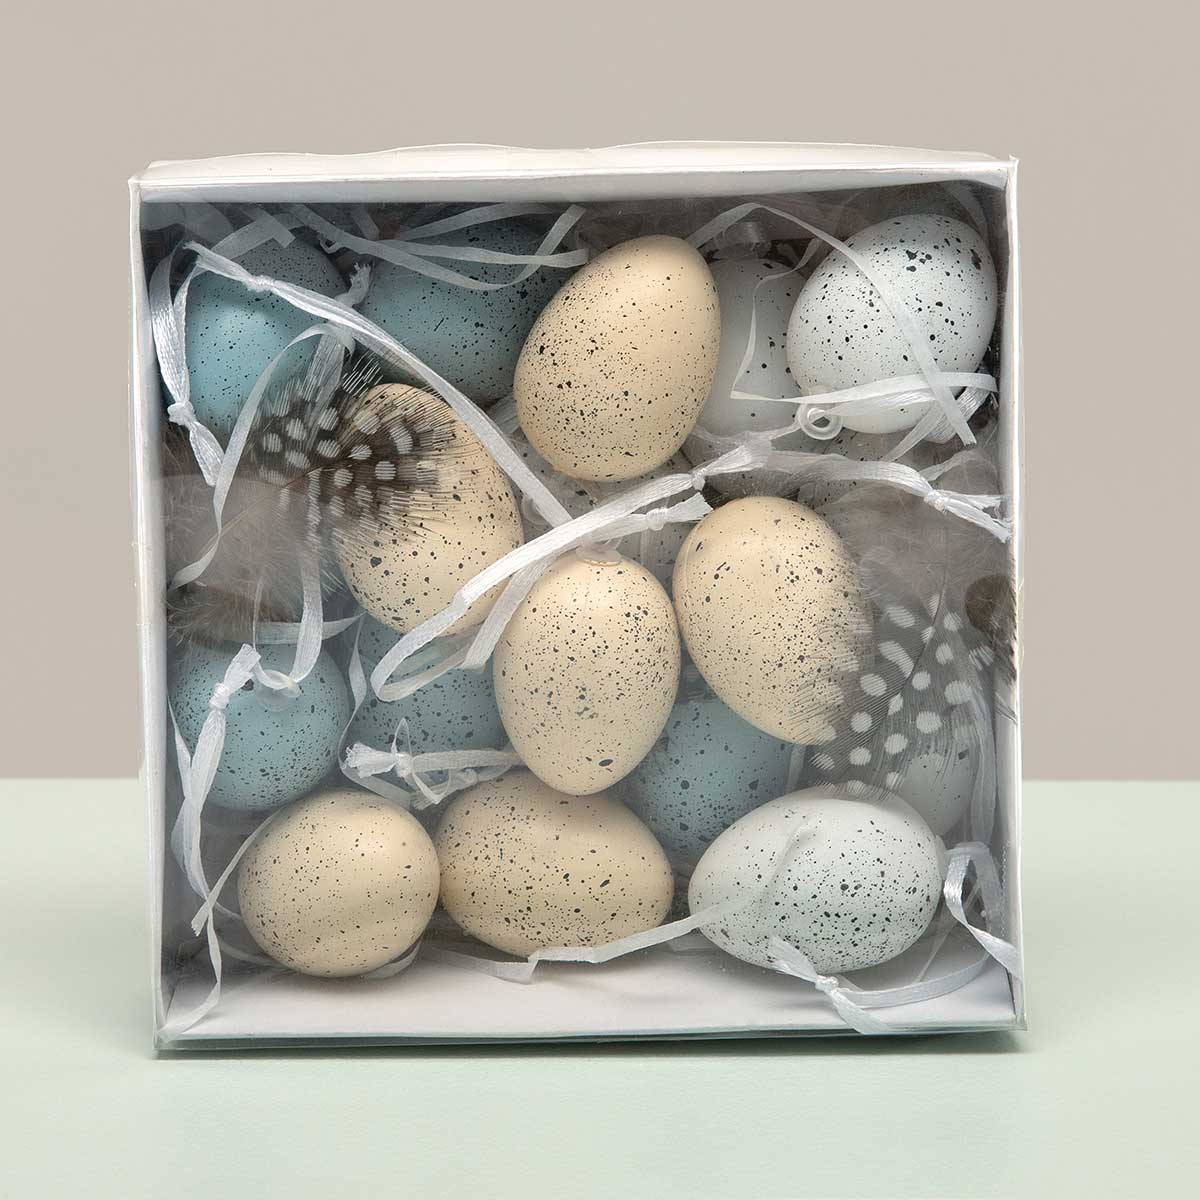 ORNAMENT EGGS BOX OF 18 1IN X 1.75IN/5IN X 1.5IN X 5IN - Click Image to Close